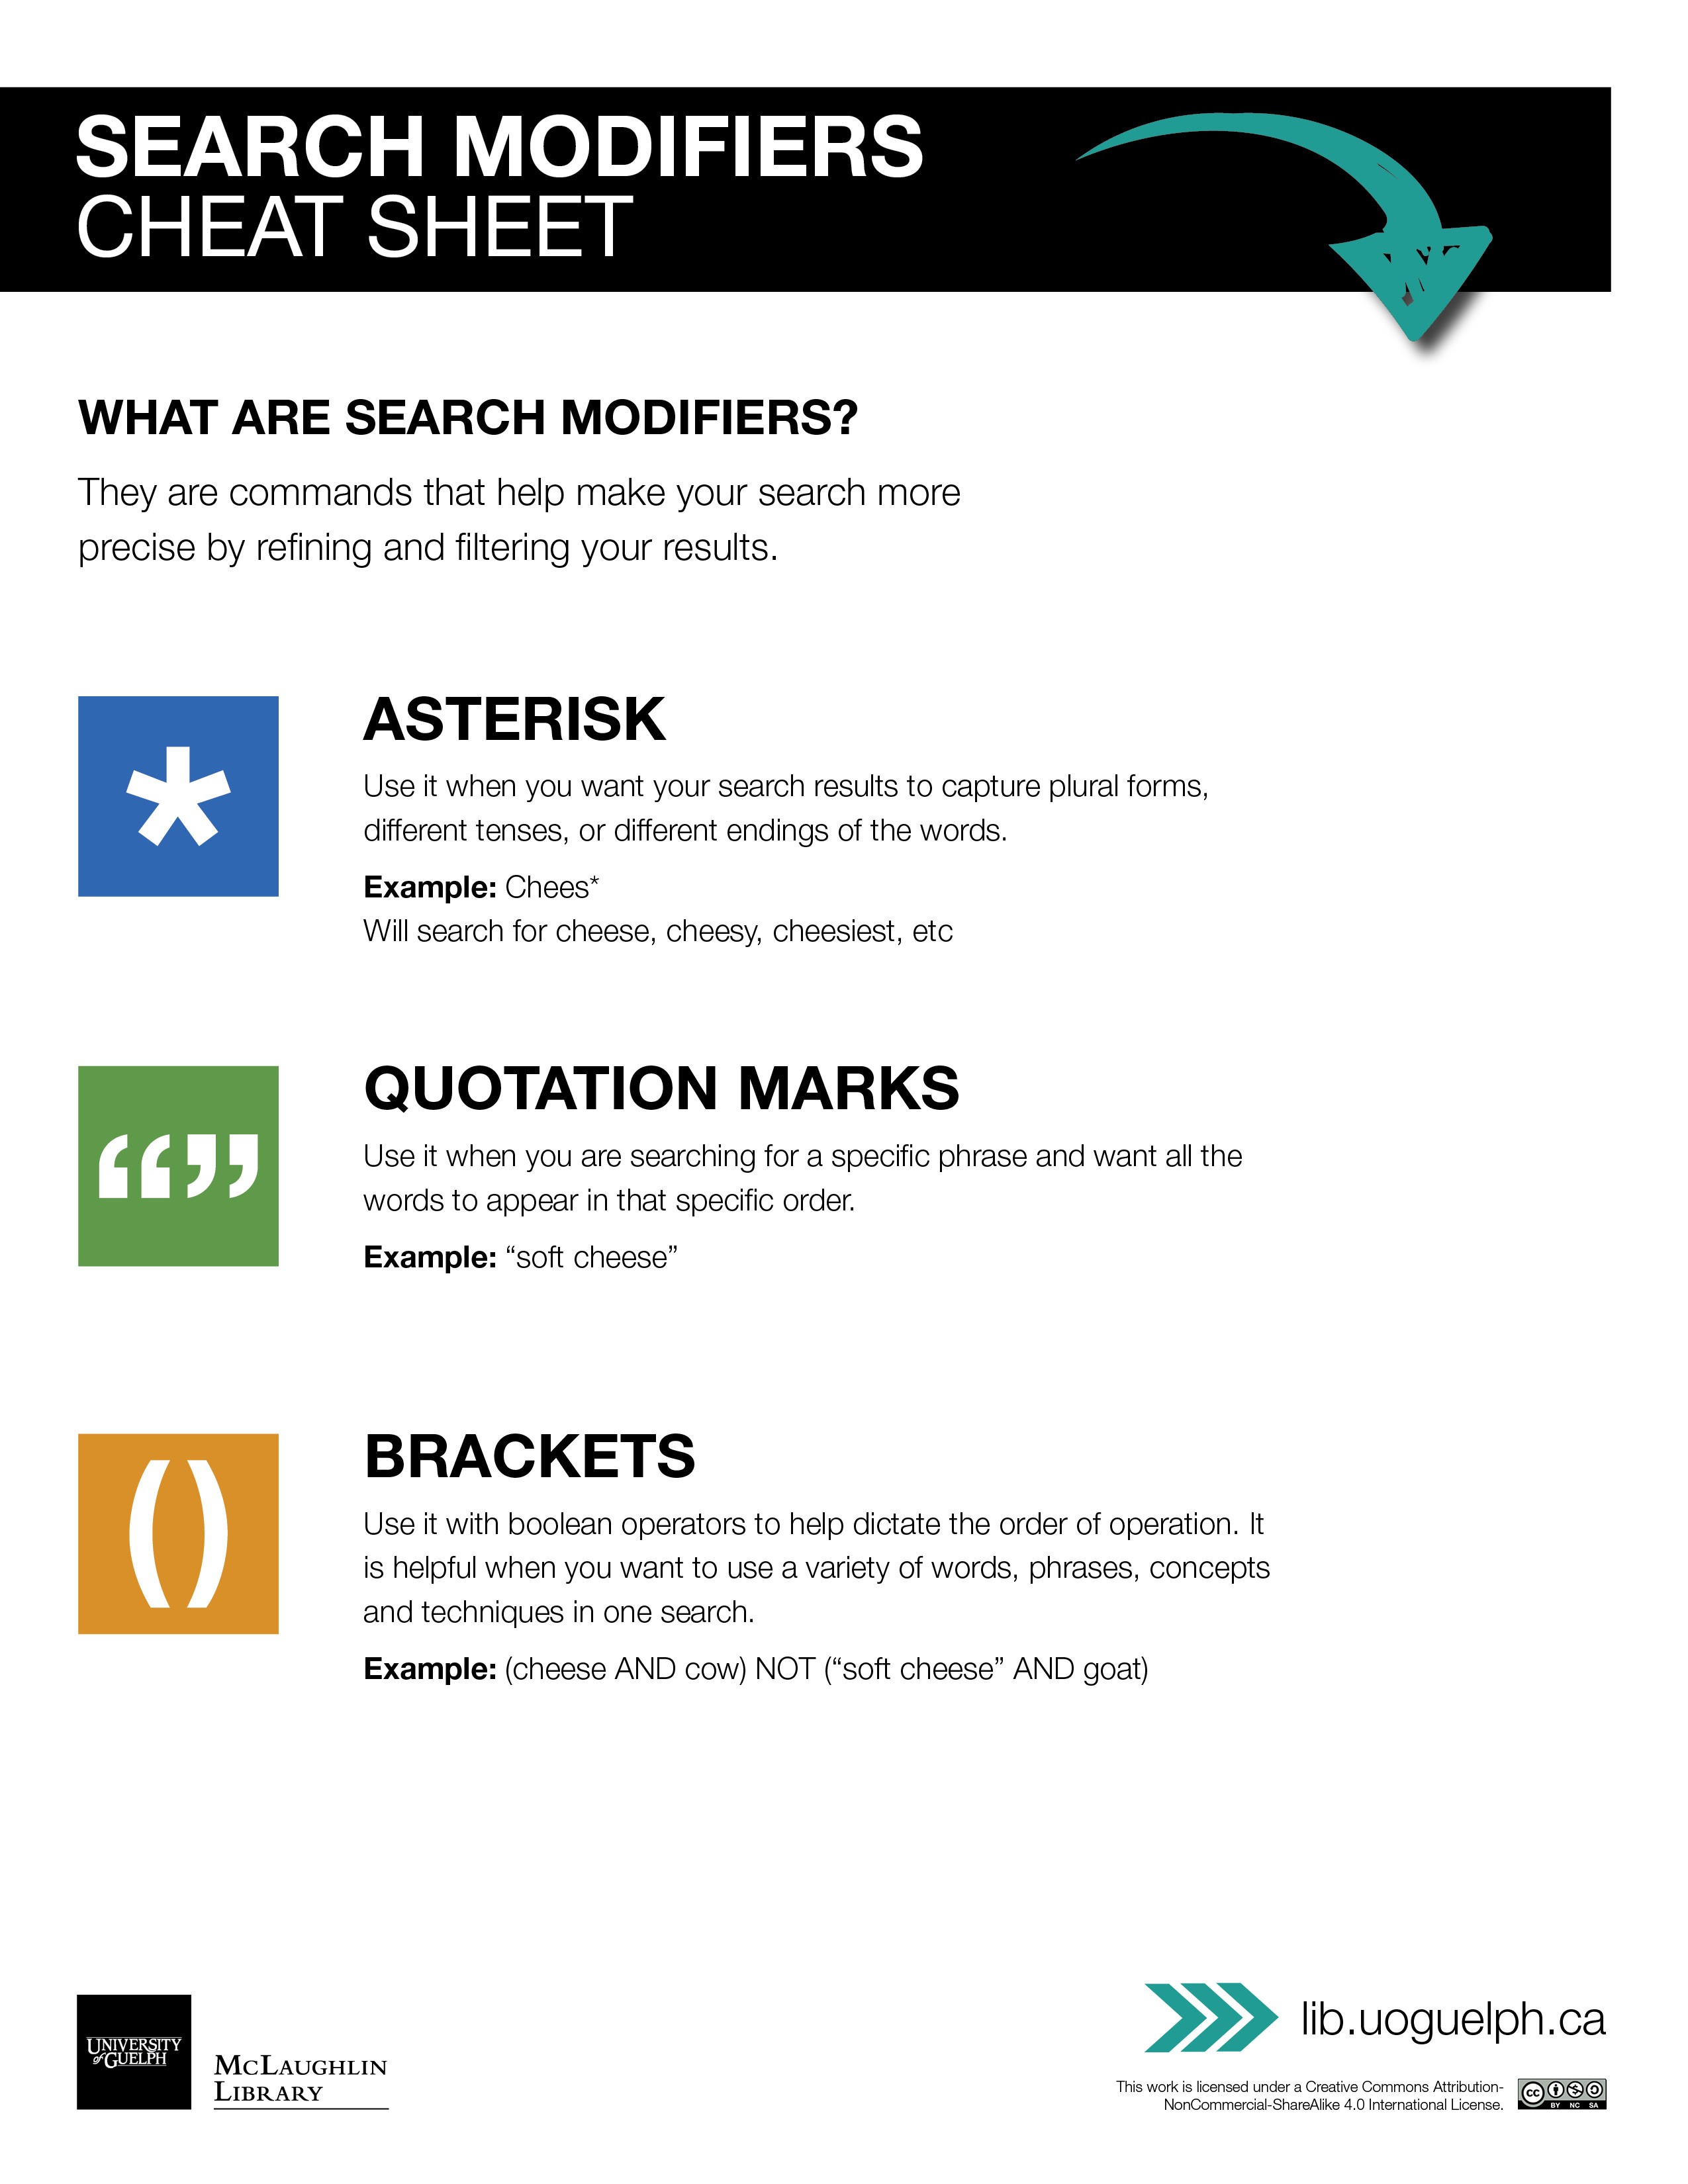 Search Modifiers Cheat Sheet. See transcript for full content. 